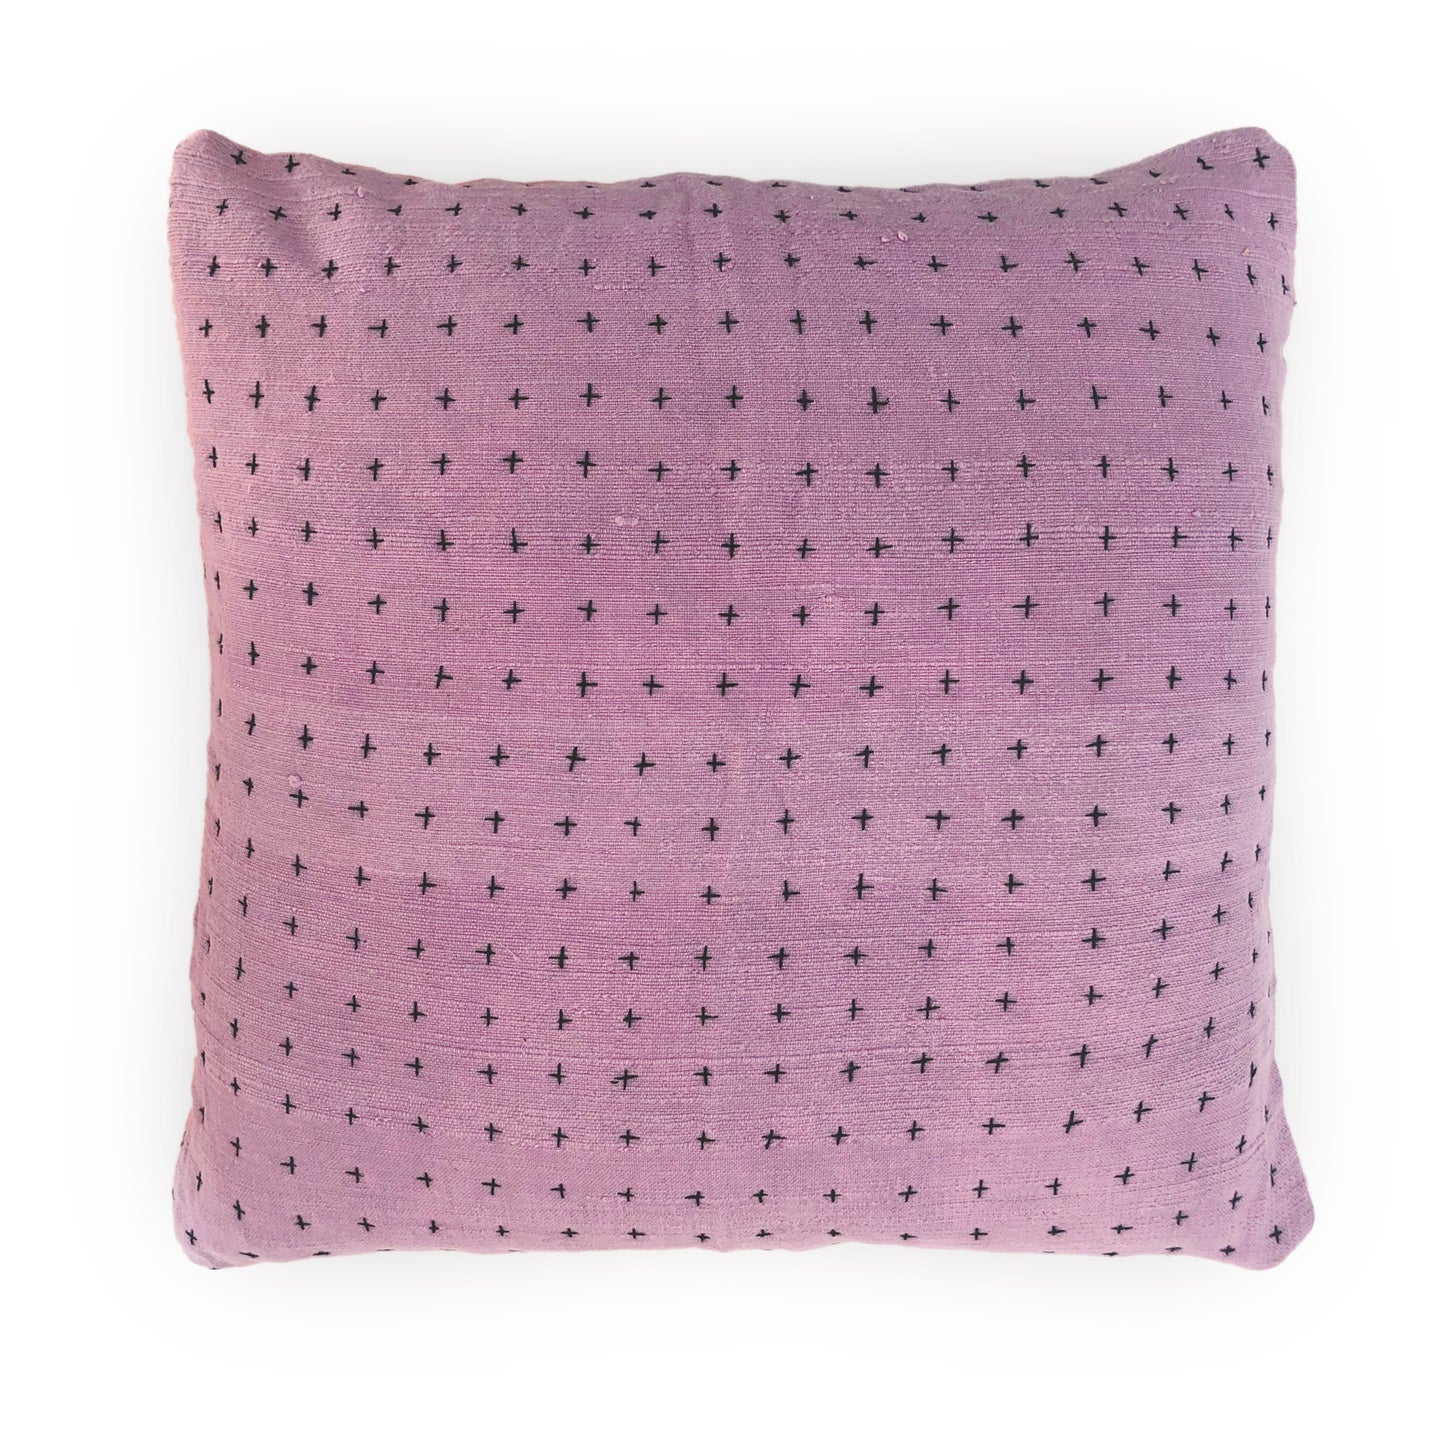 Pillow White & Lavender 18x18in